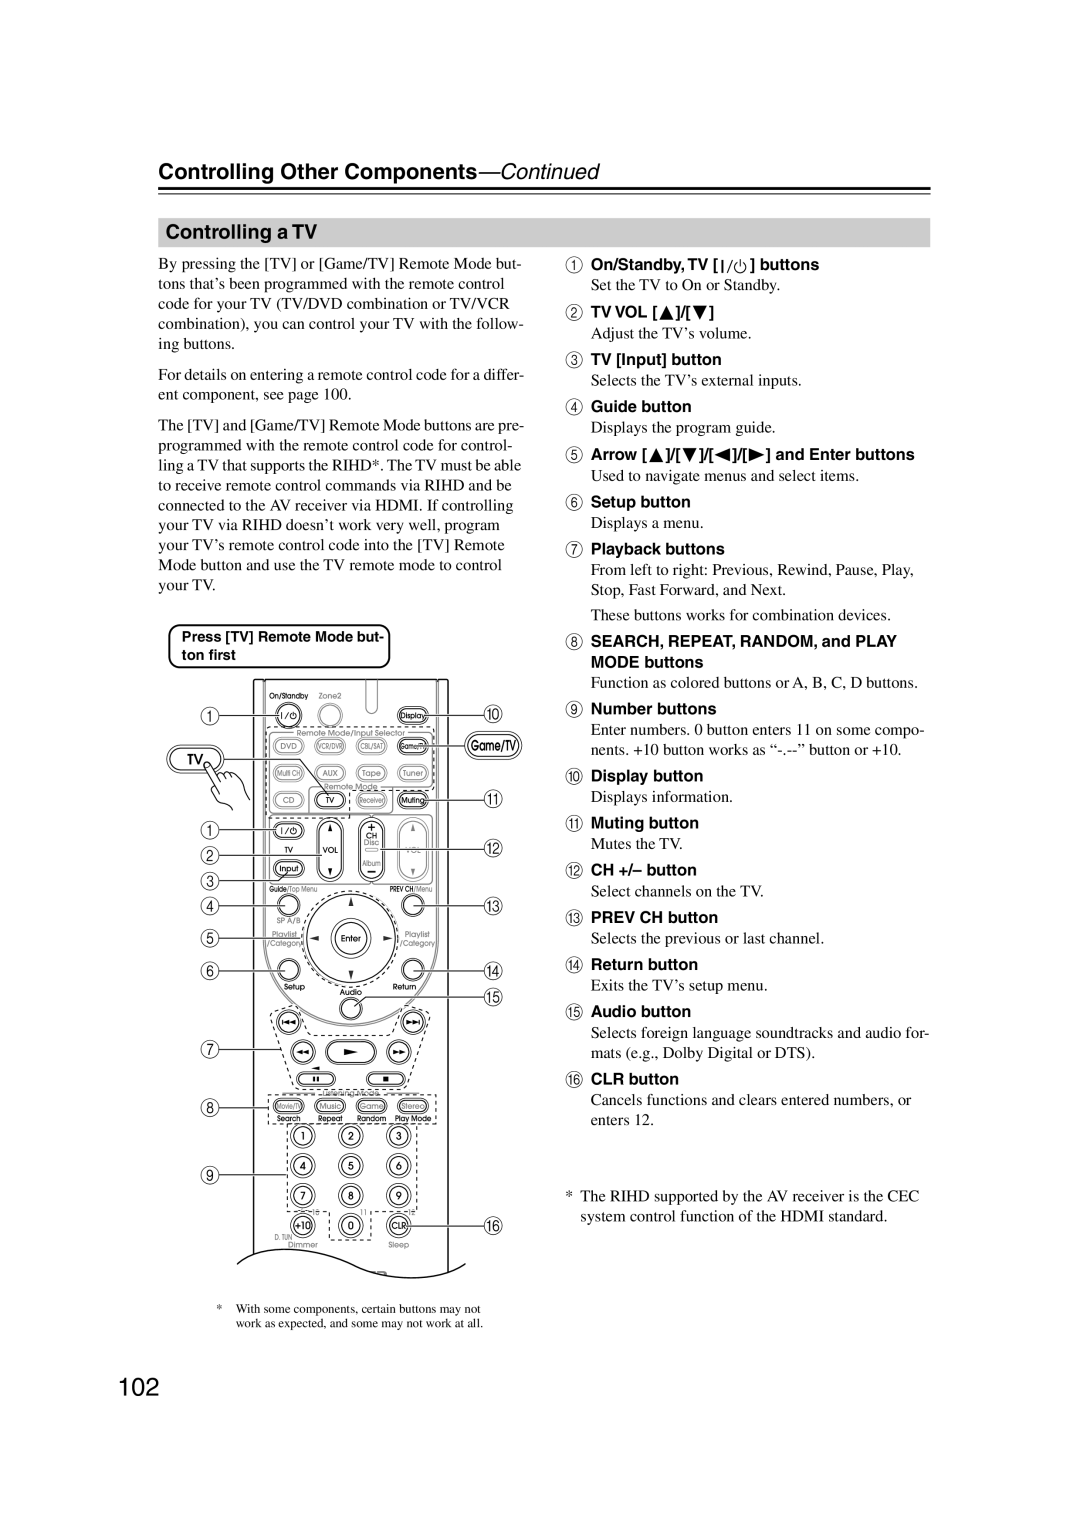 Integra DTR-5.9 instruction manual Controlling a TV, Controlling Other Components—Continued 